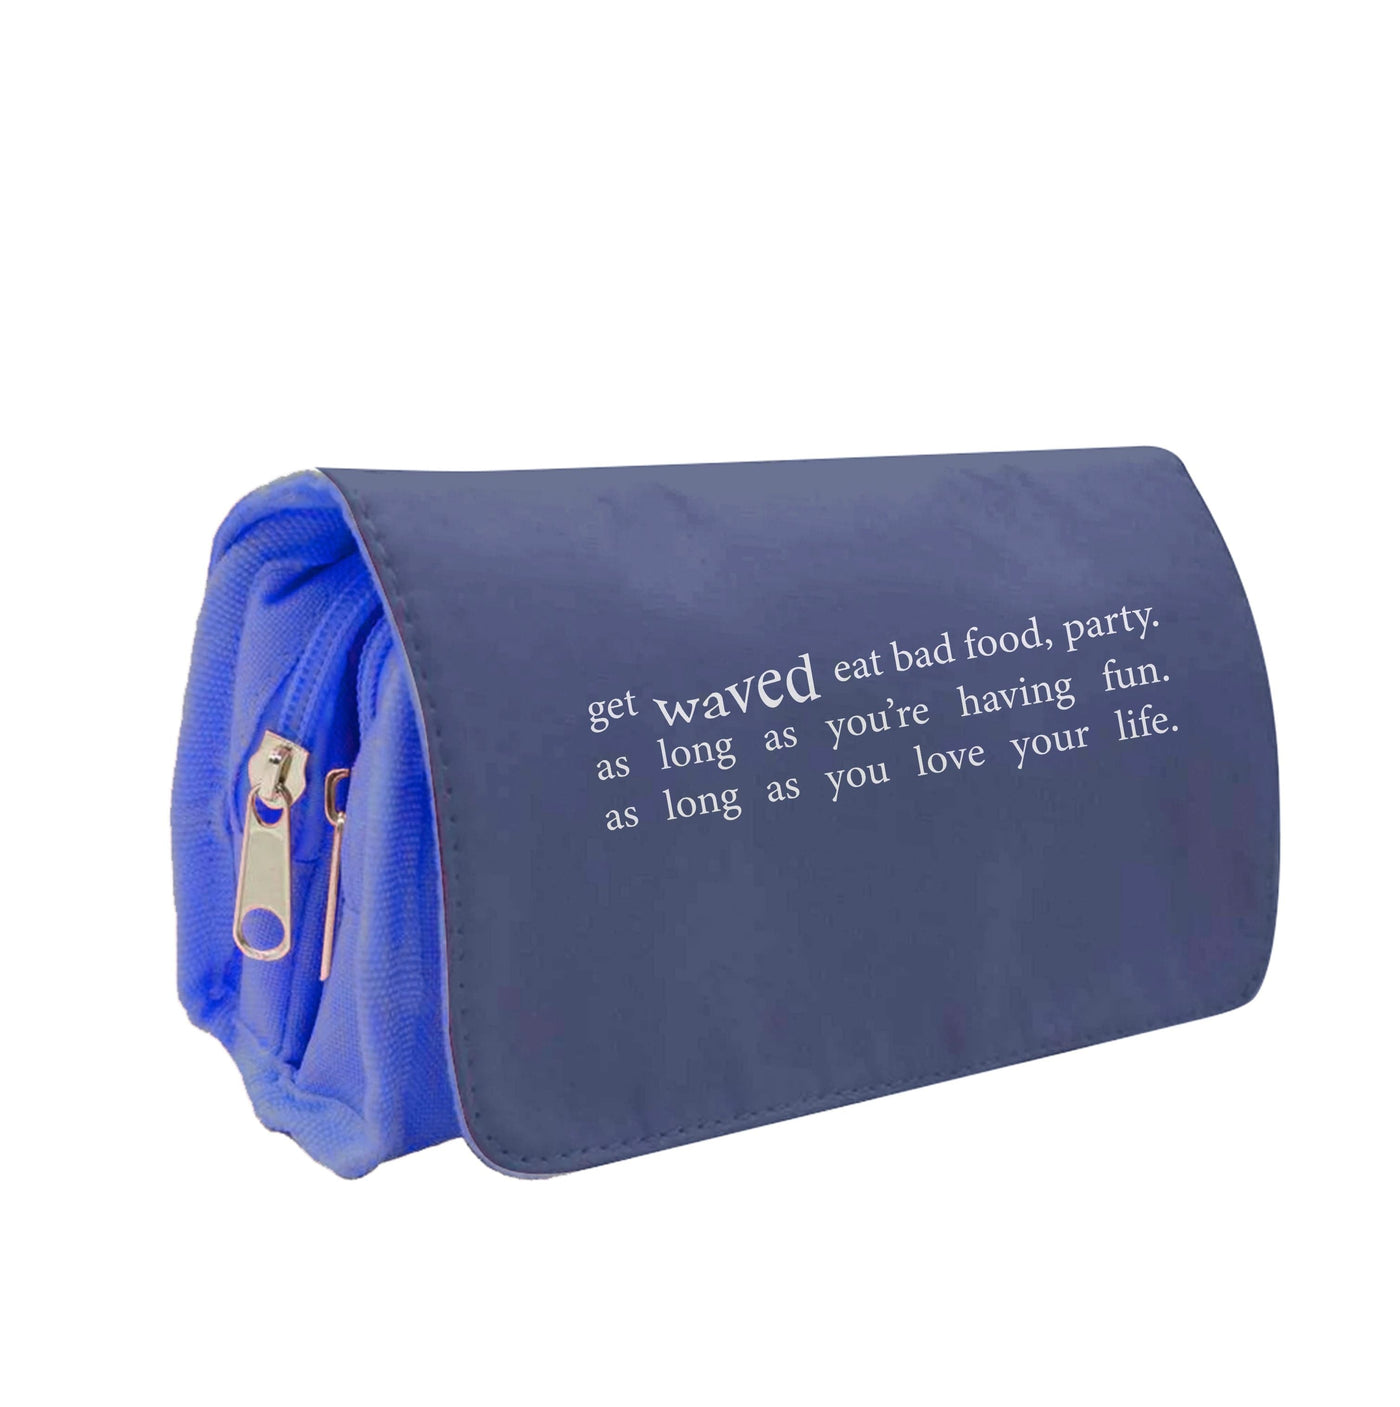 There's More To Life - Loyle Carner Pencil Case